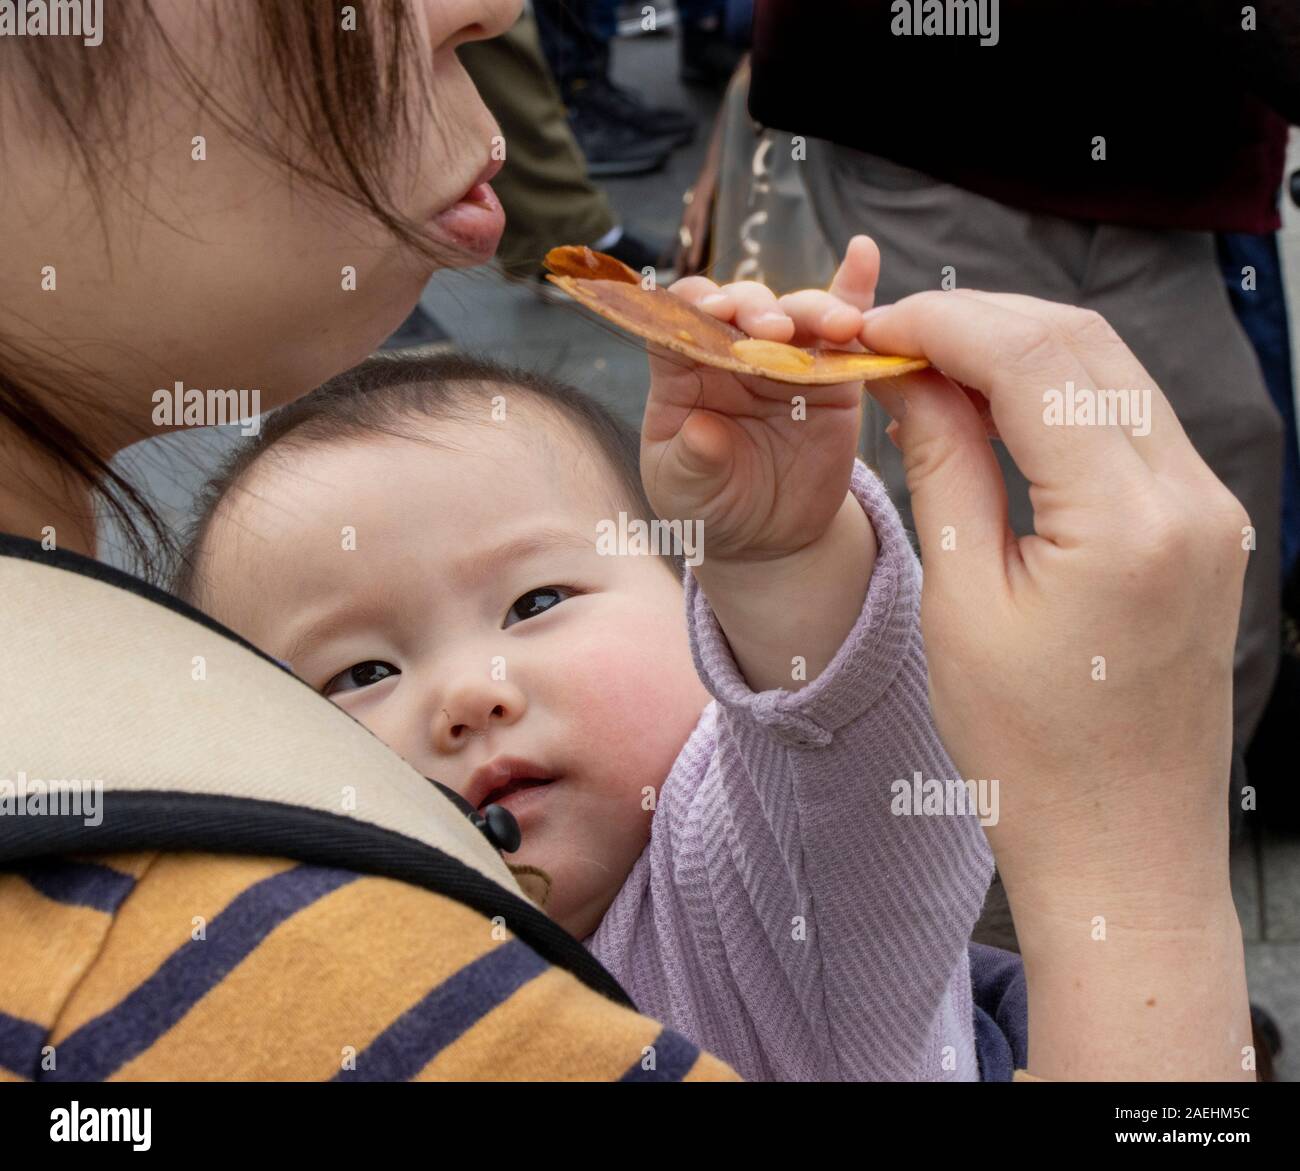 baby reaching for food that mother is eating, Tokyo, Japan Stock Photo